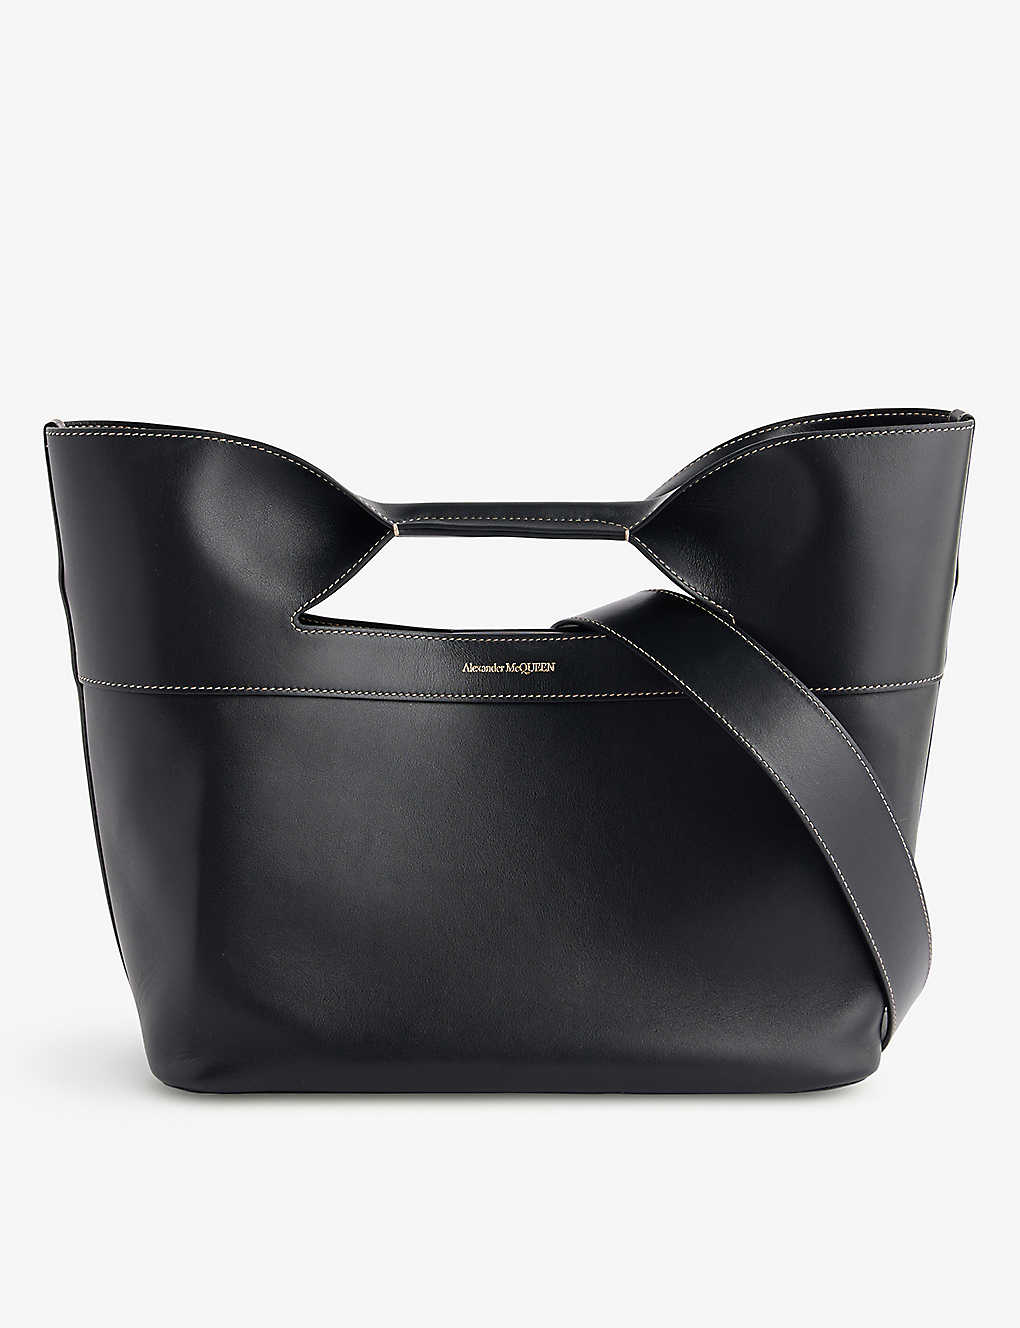 Alexander Mcqueen Black The Bow Leather Top-handle Bag